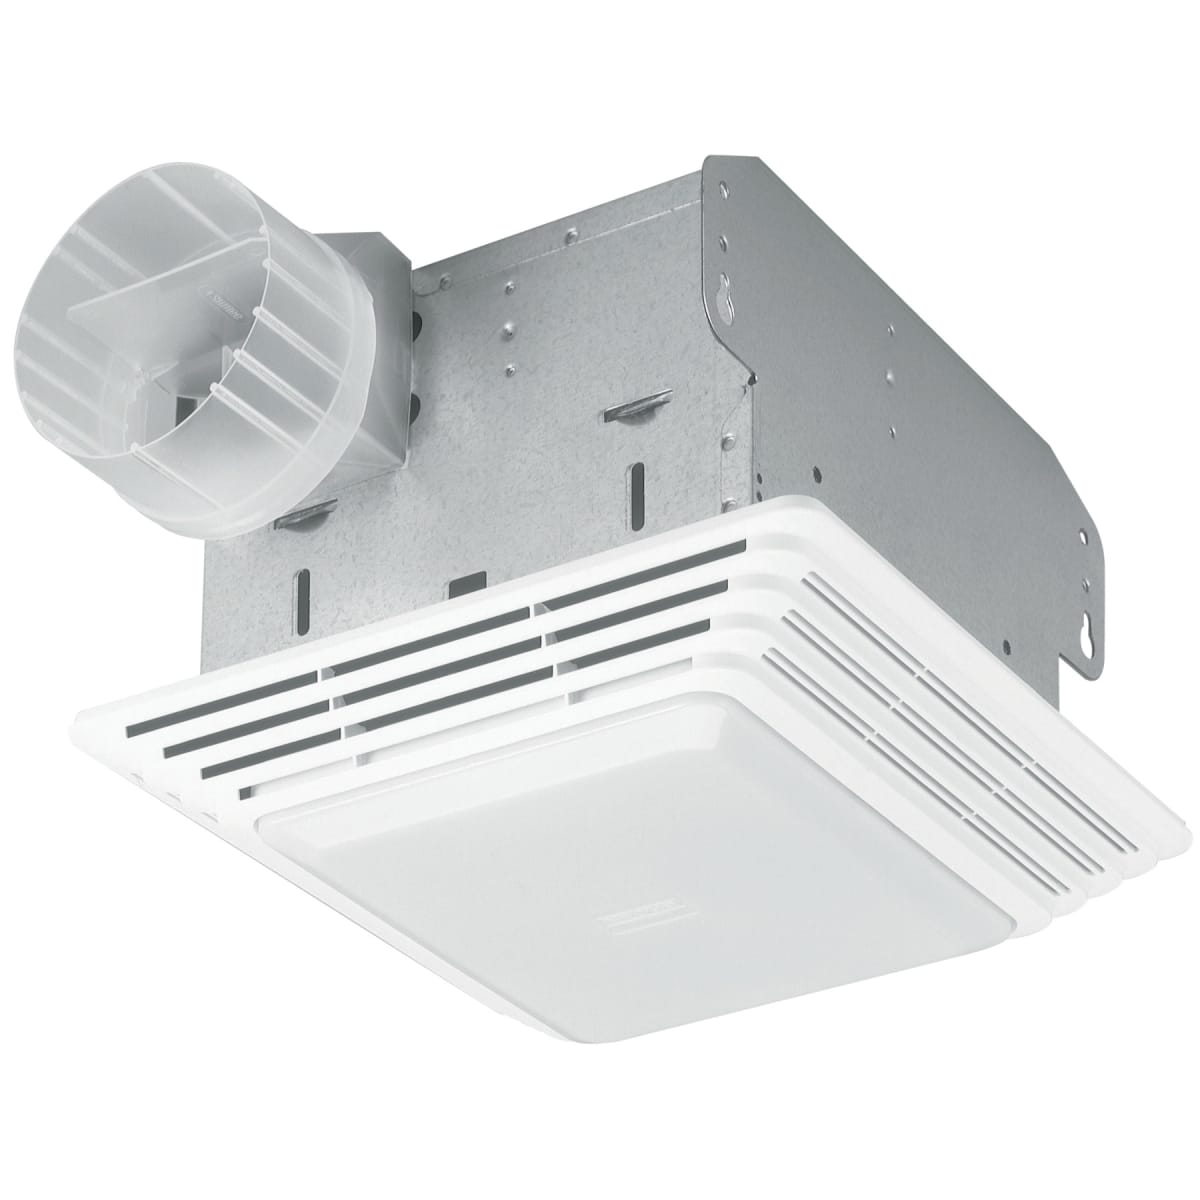 Broan 678 White Economy 50 CFM 2.5 Sone Ceiling Mounted Bath Fan with Light 